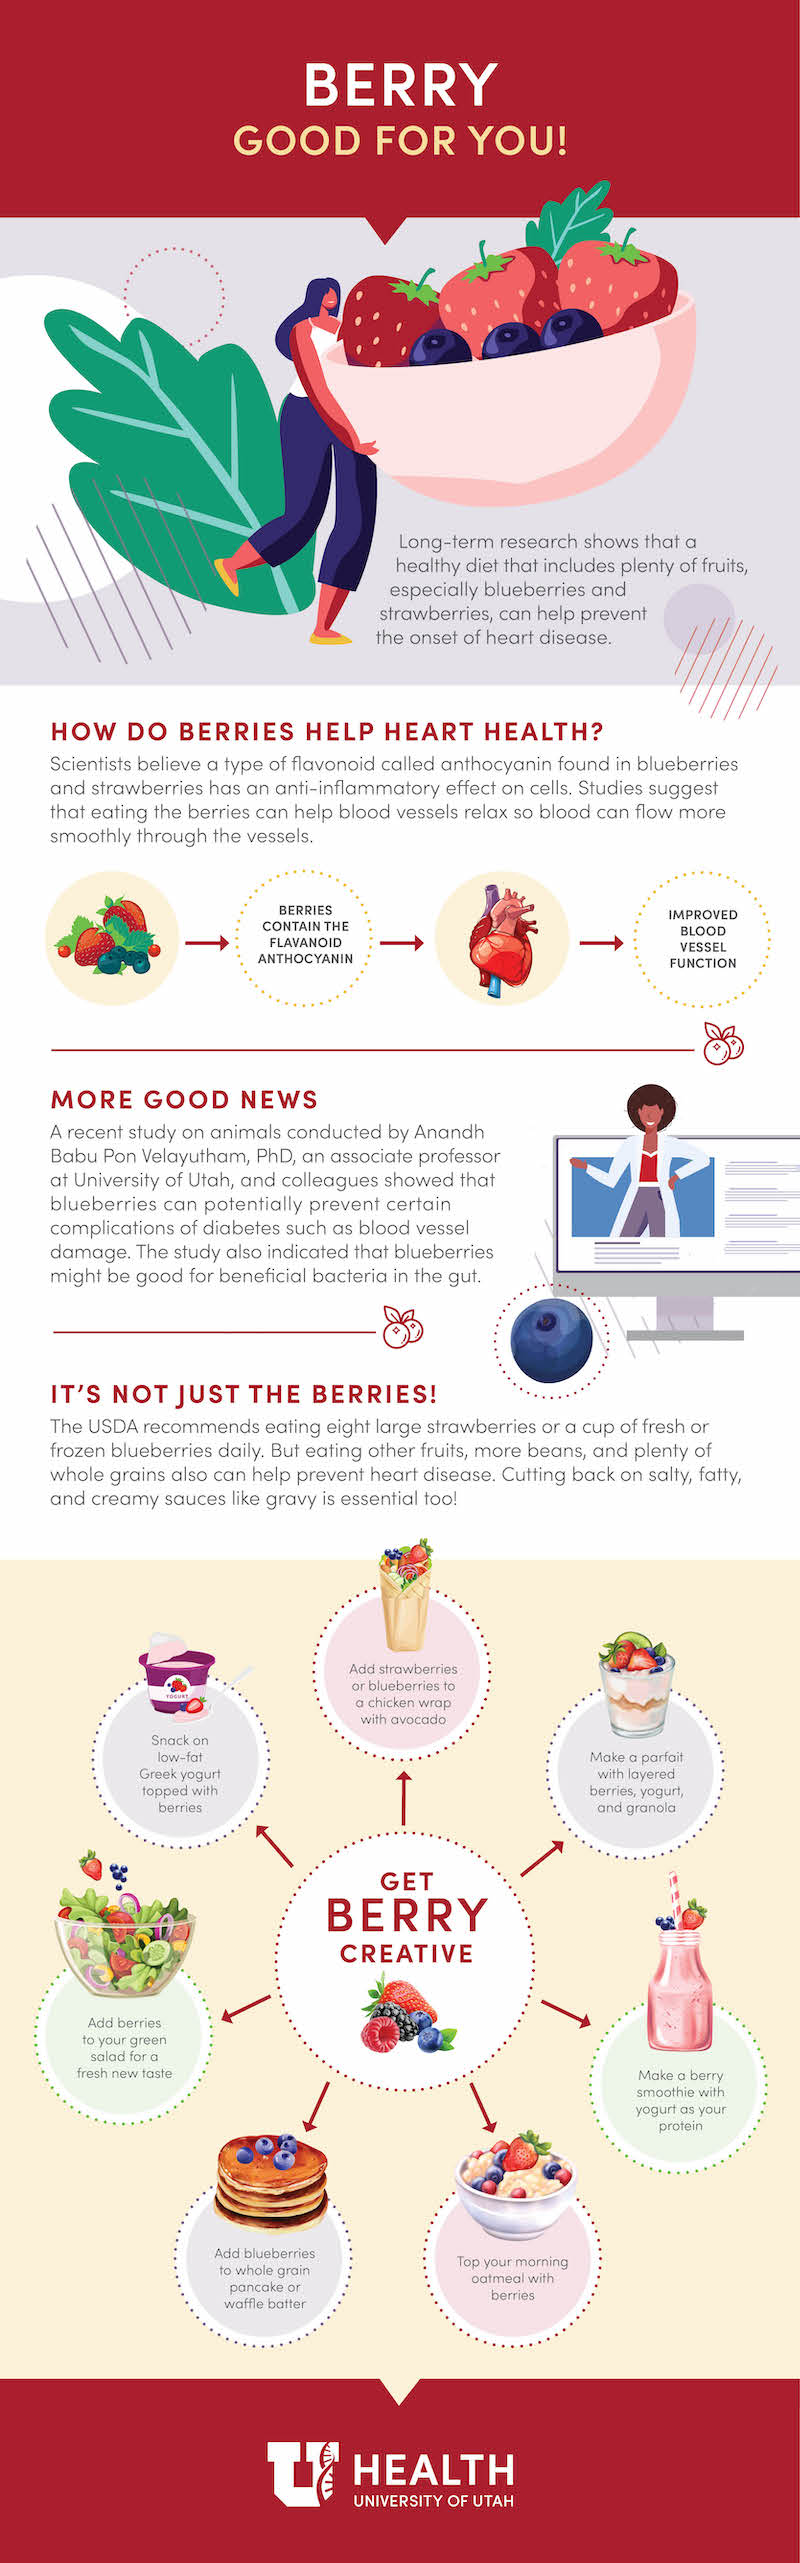 Infographic explains how research suggests eating blueberries and strawberries can lower heart disease risk.